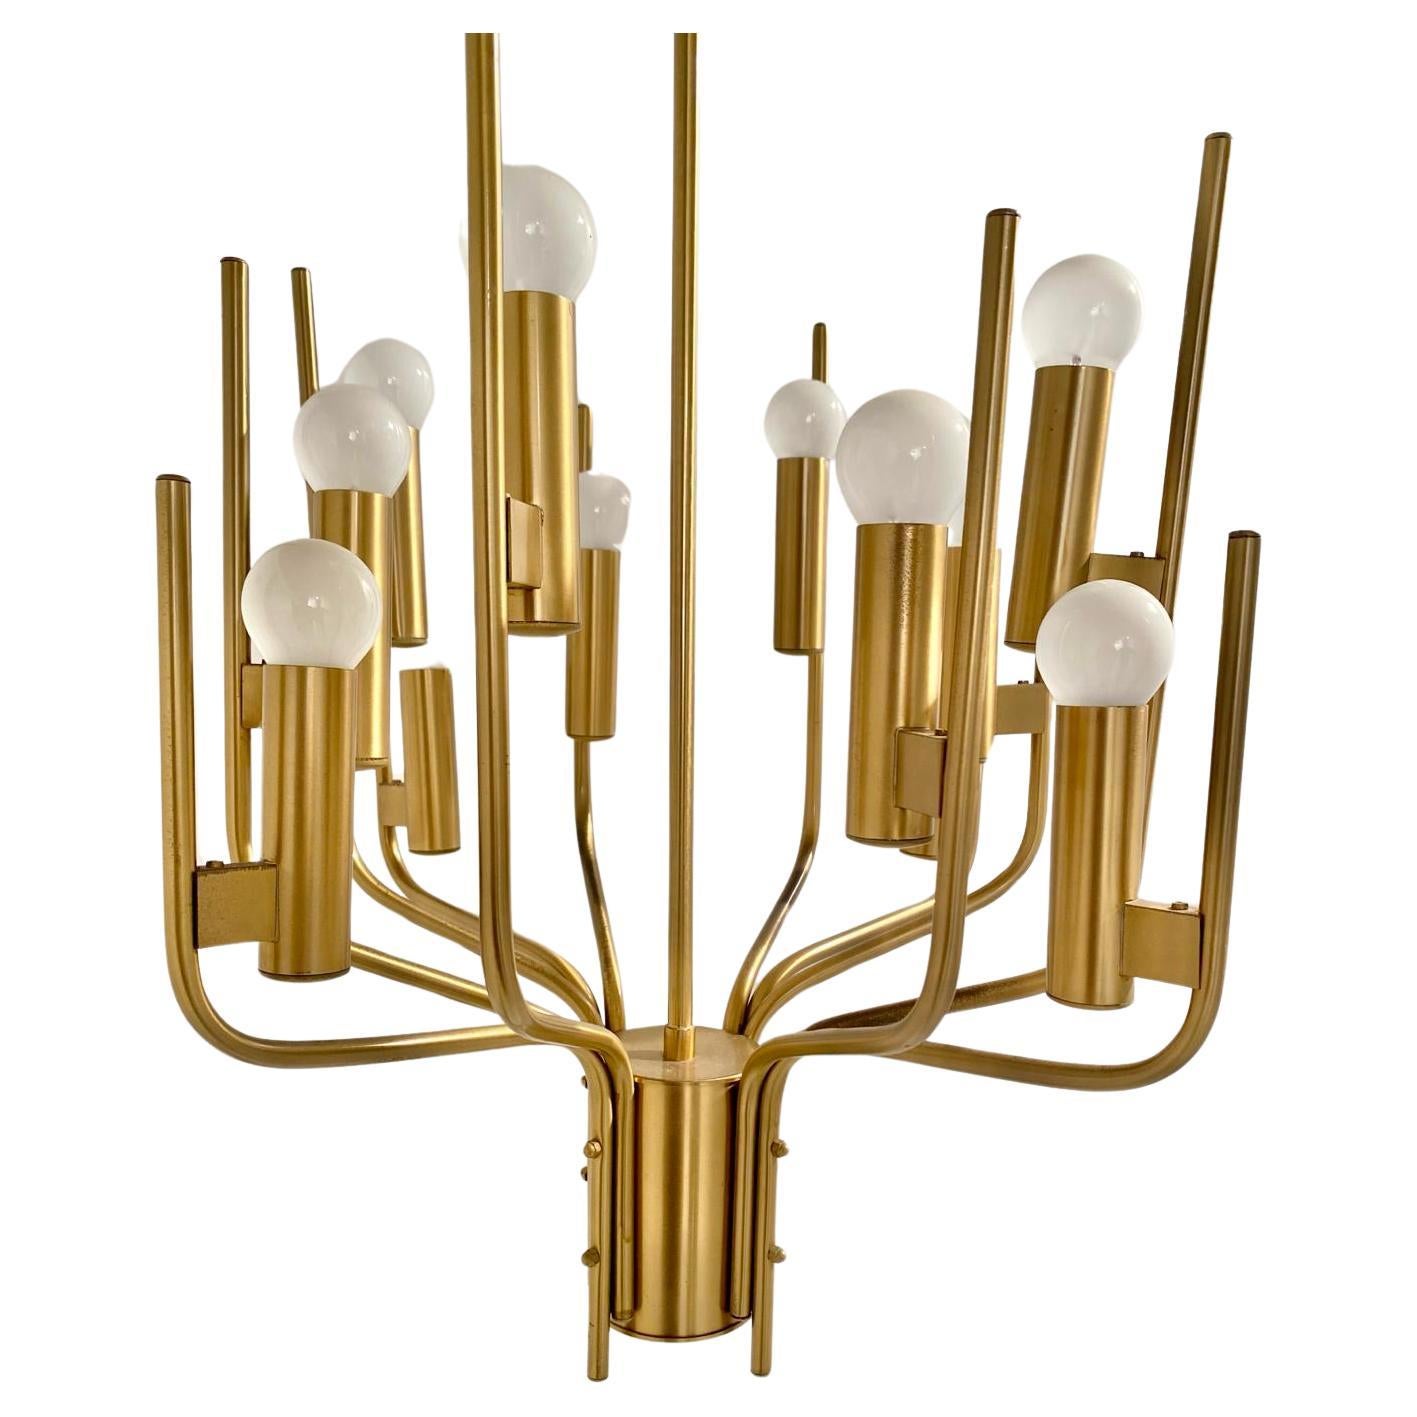 Vintage brass chandelier, Oscar Torlasco for Stilkronen, Italy 1960s.
A rare and beatiful golden brass chandelier. Oscar Torlasco designer, manufactured in Italy in the 1950s. Classic recalls in its shape with elegant modern touch that makes the